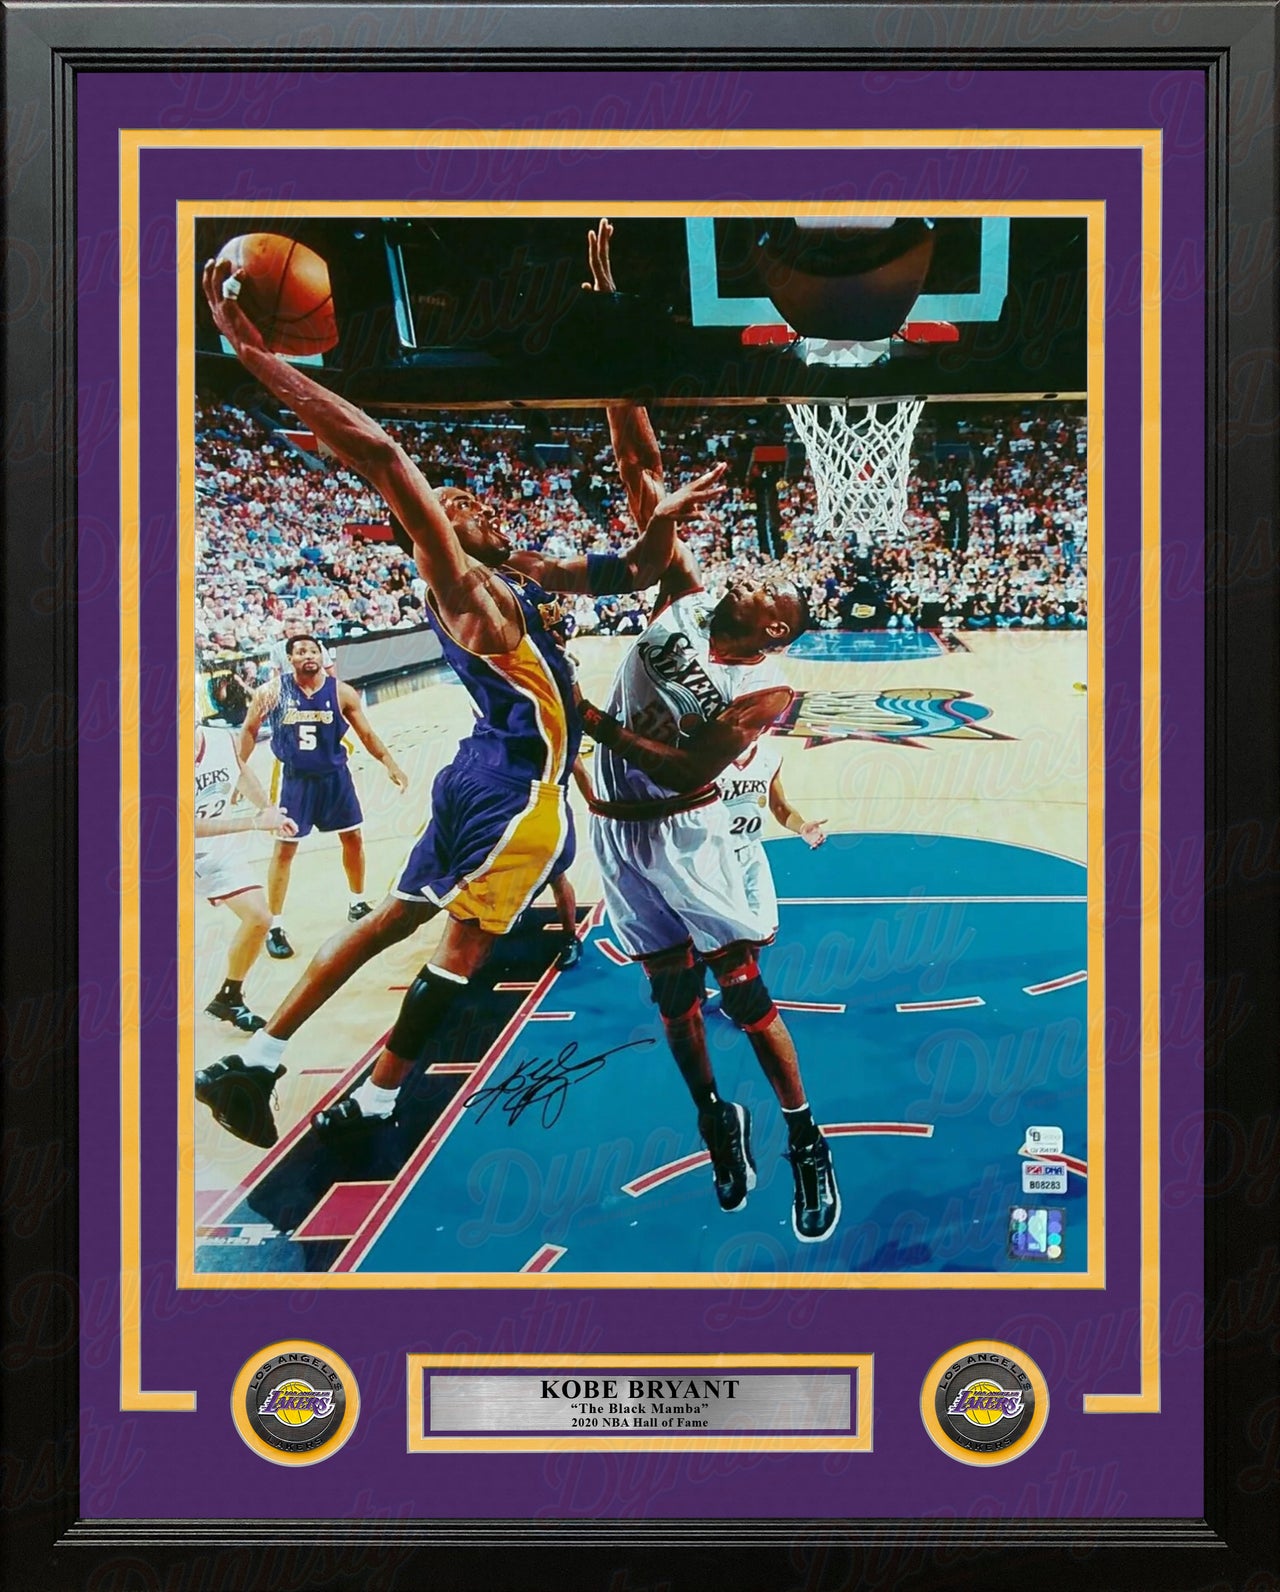 Kobe Bryant 2001 NBA Finals Autographed Los Angeles Lakers 16x20 Framed Basketball Photo - Dynasty Sports & Framing 